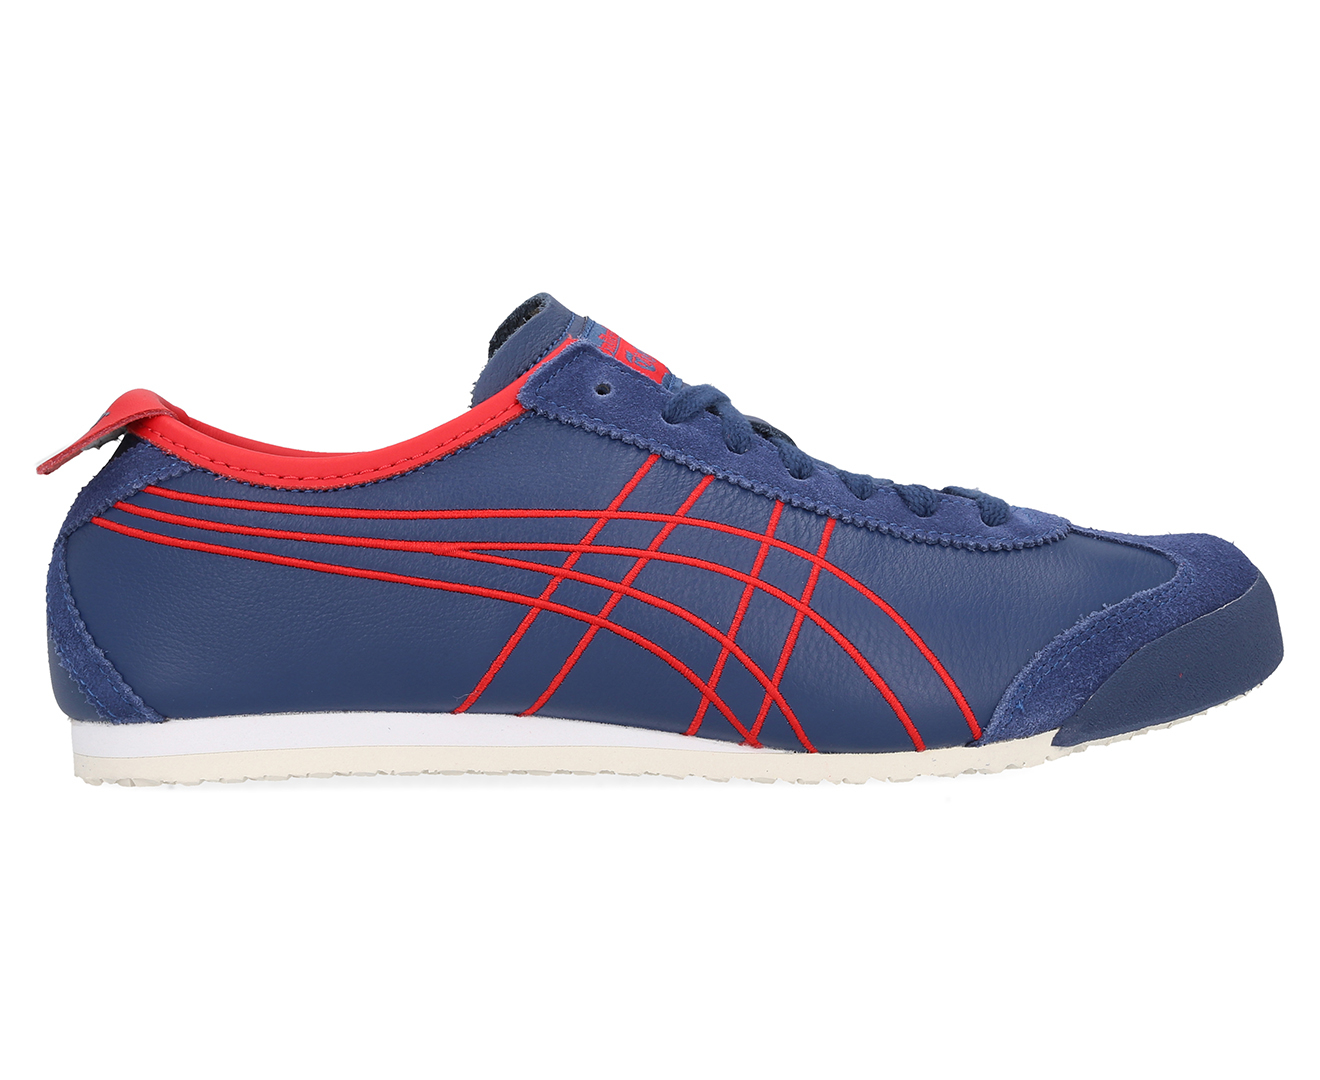 Onitsuka Tiger Mexico 66 Shoe - Midnight Blue/Classic Red | Www.catch.co.nz